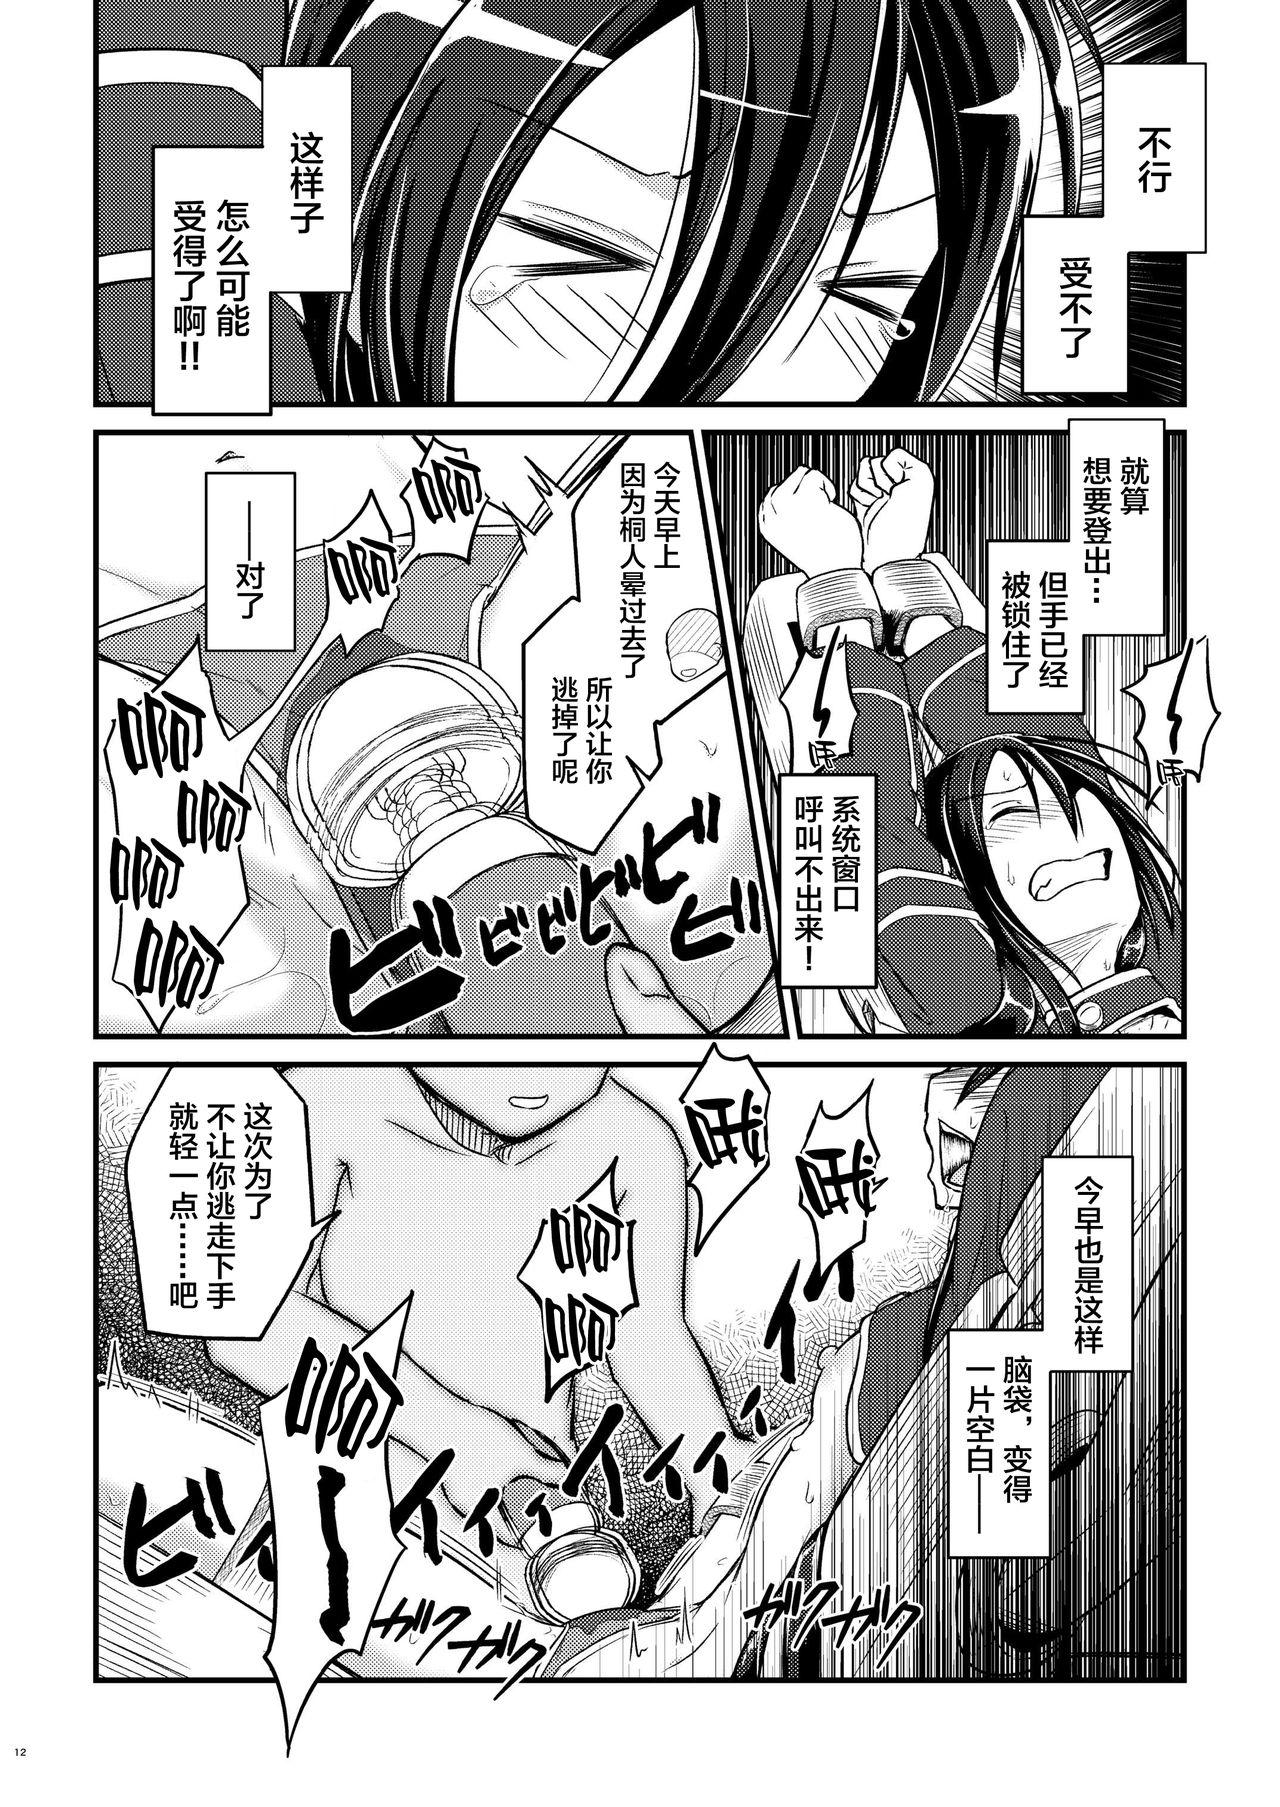 Gay Kiriko Route Another A Part Set - Sword art online Bedroom - Page 11